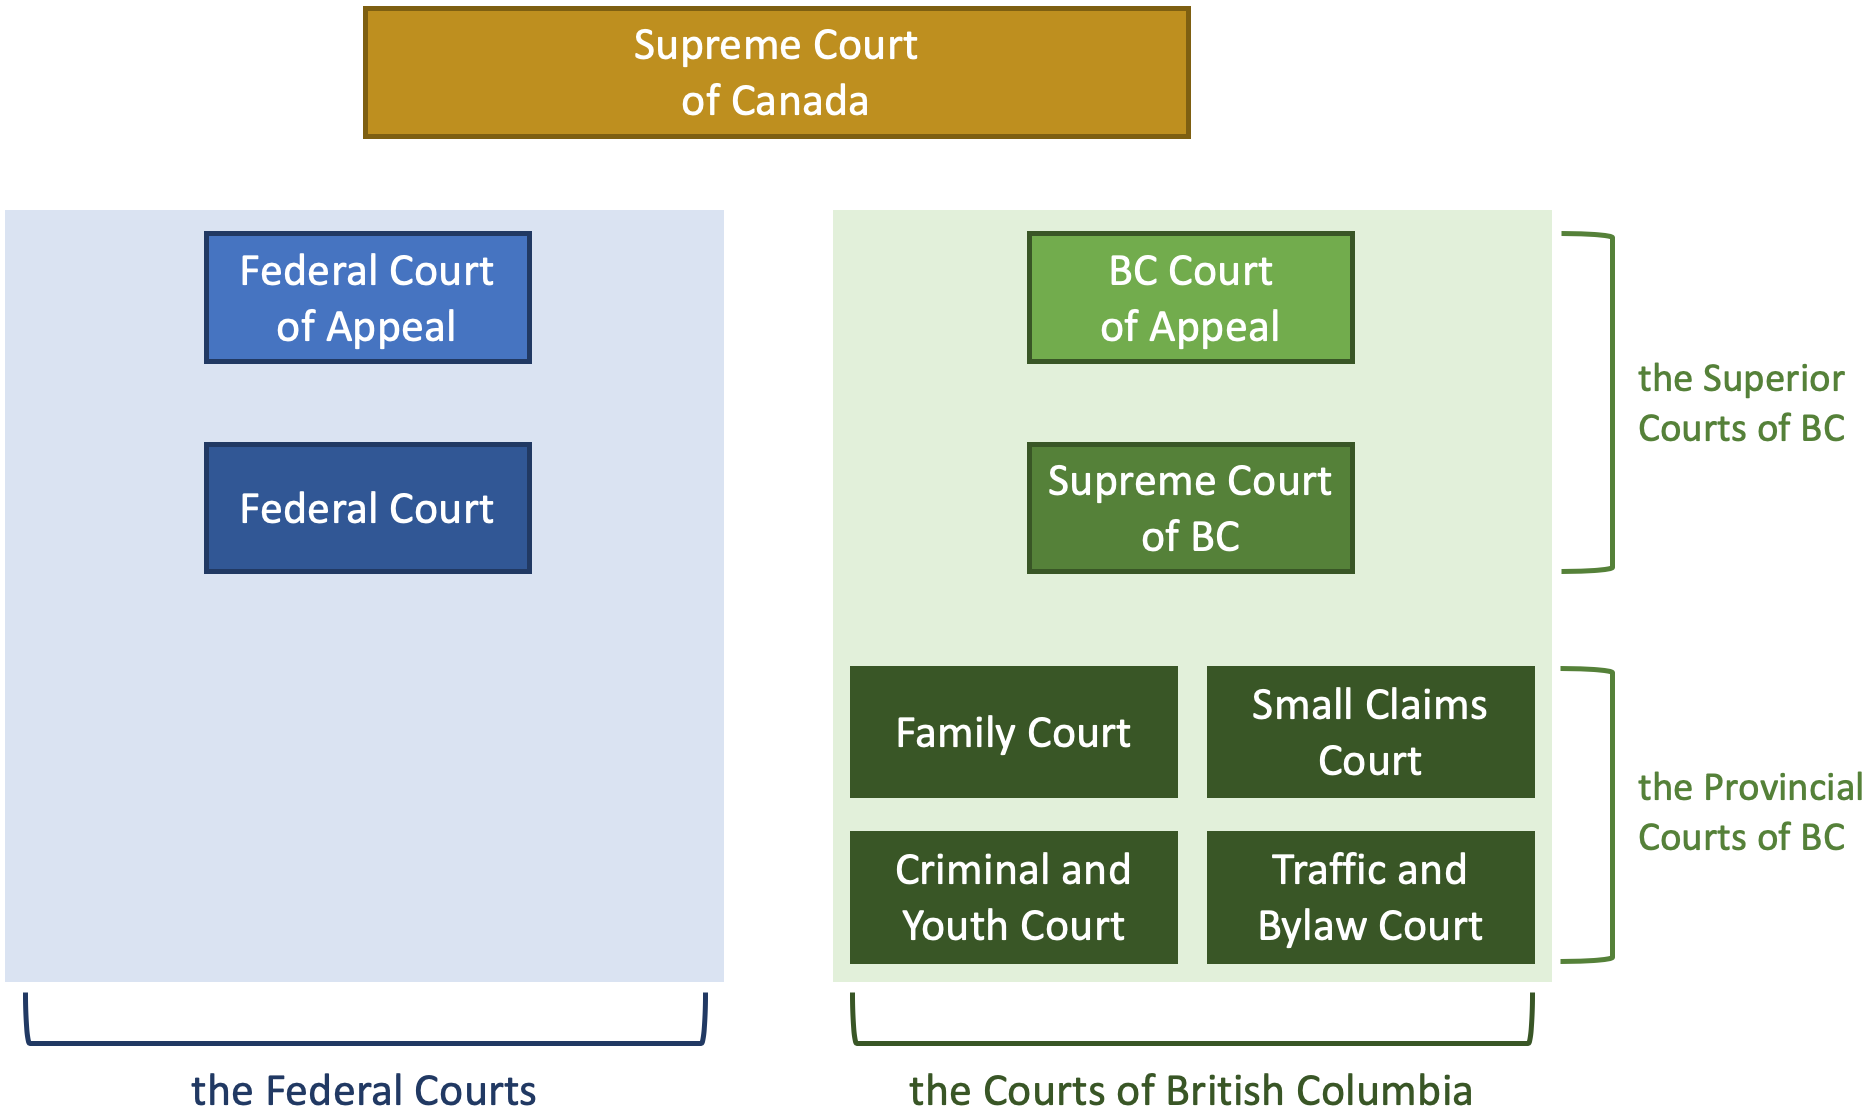 The court system in British Columbia